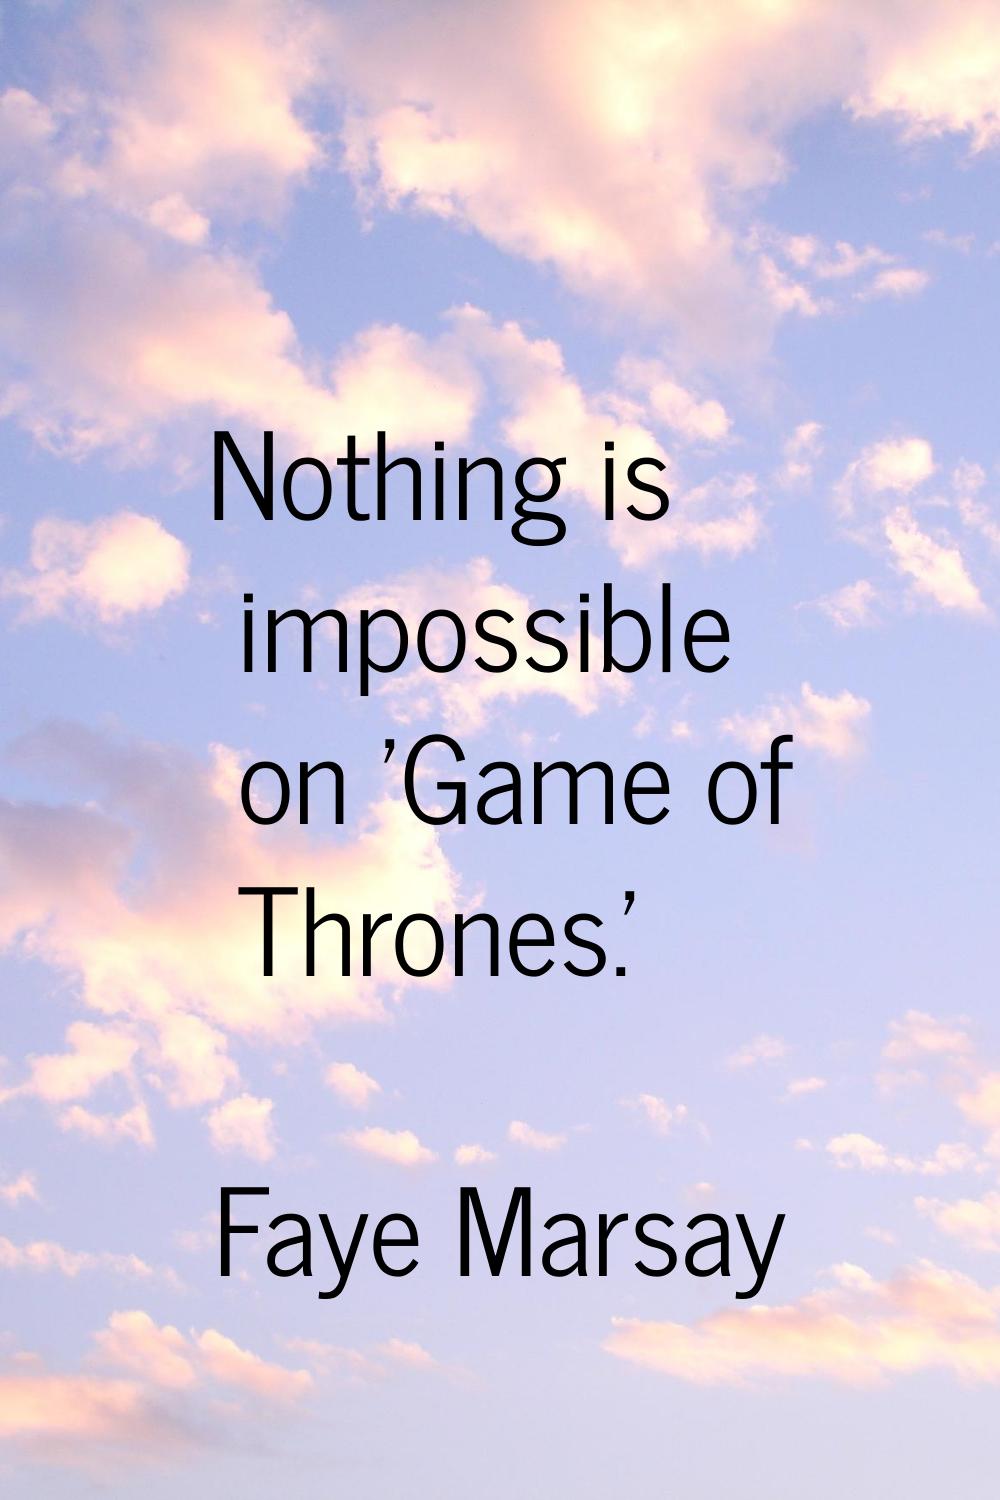 Nothing is impossible on 'Game of Thrones.'